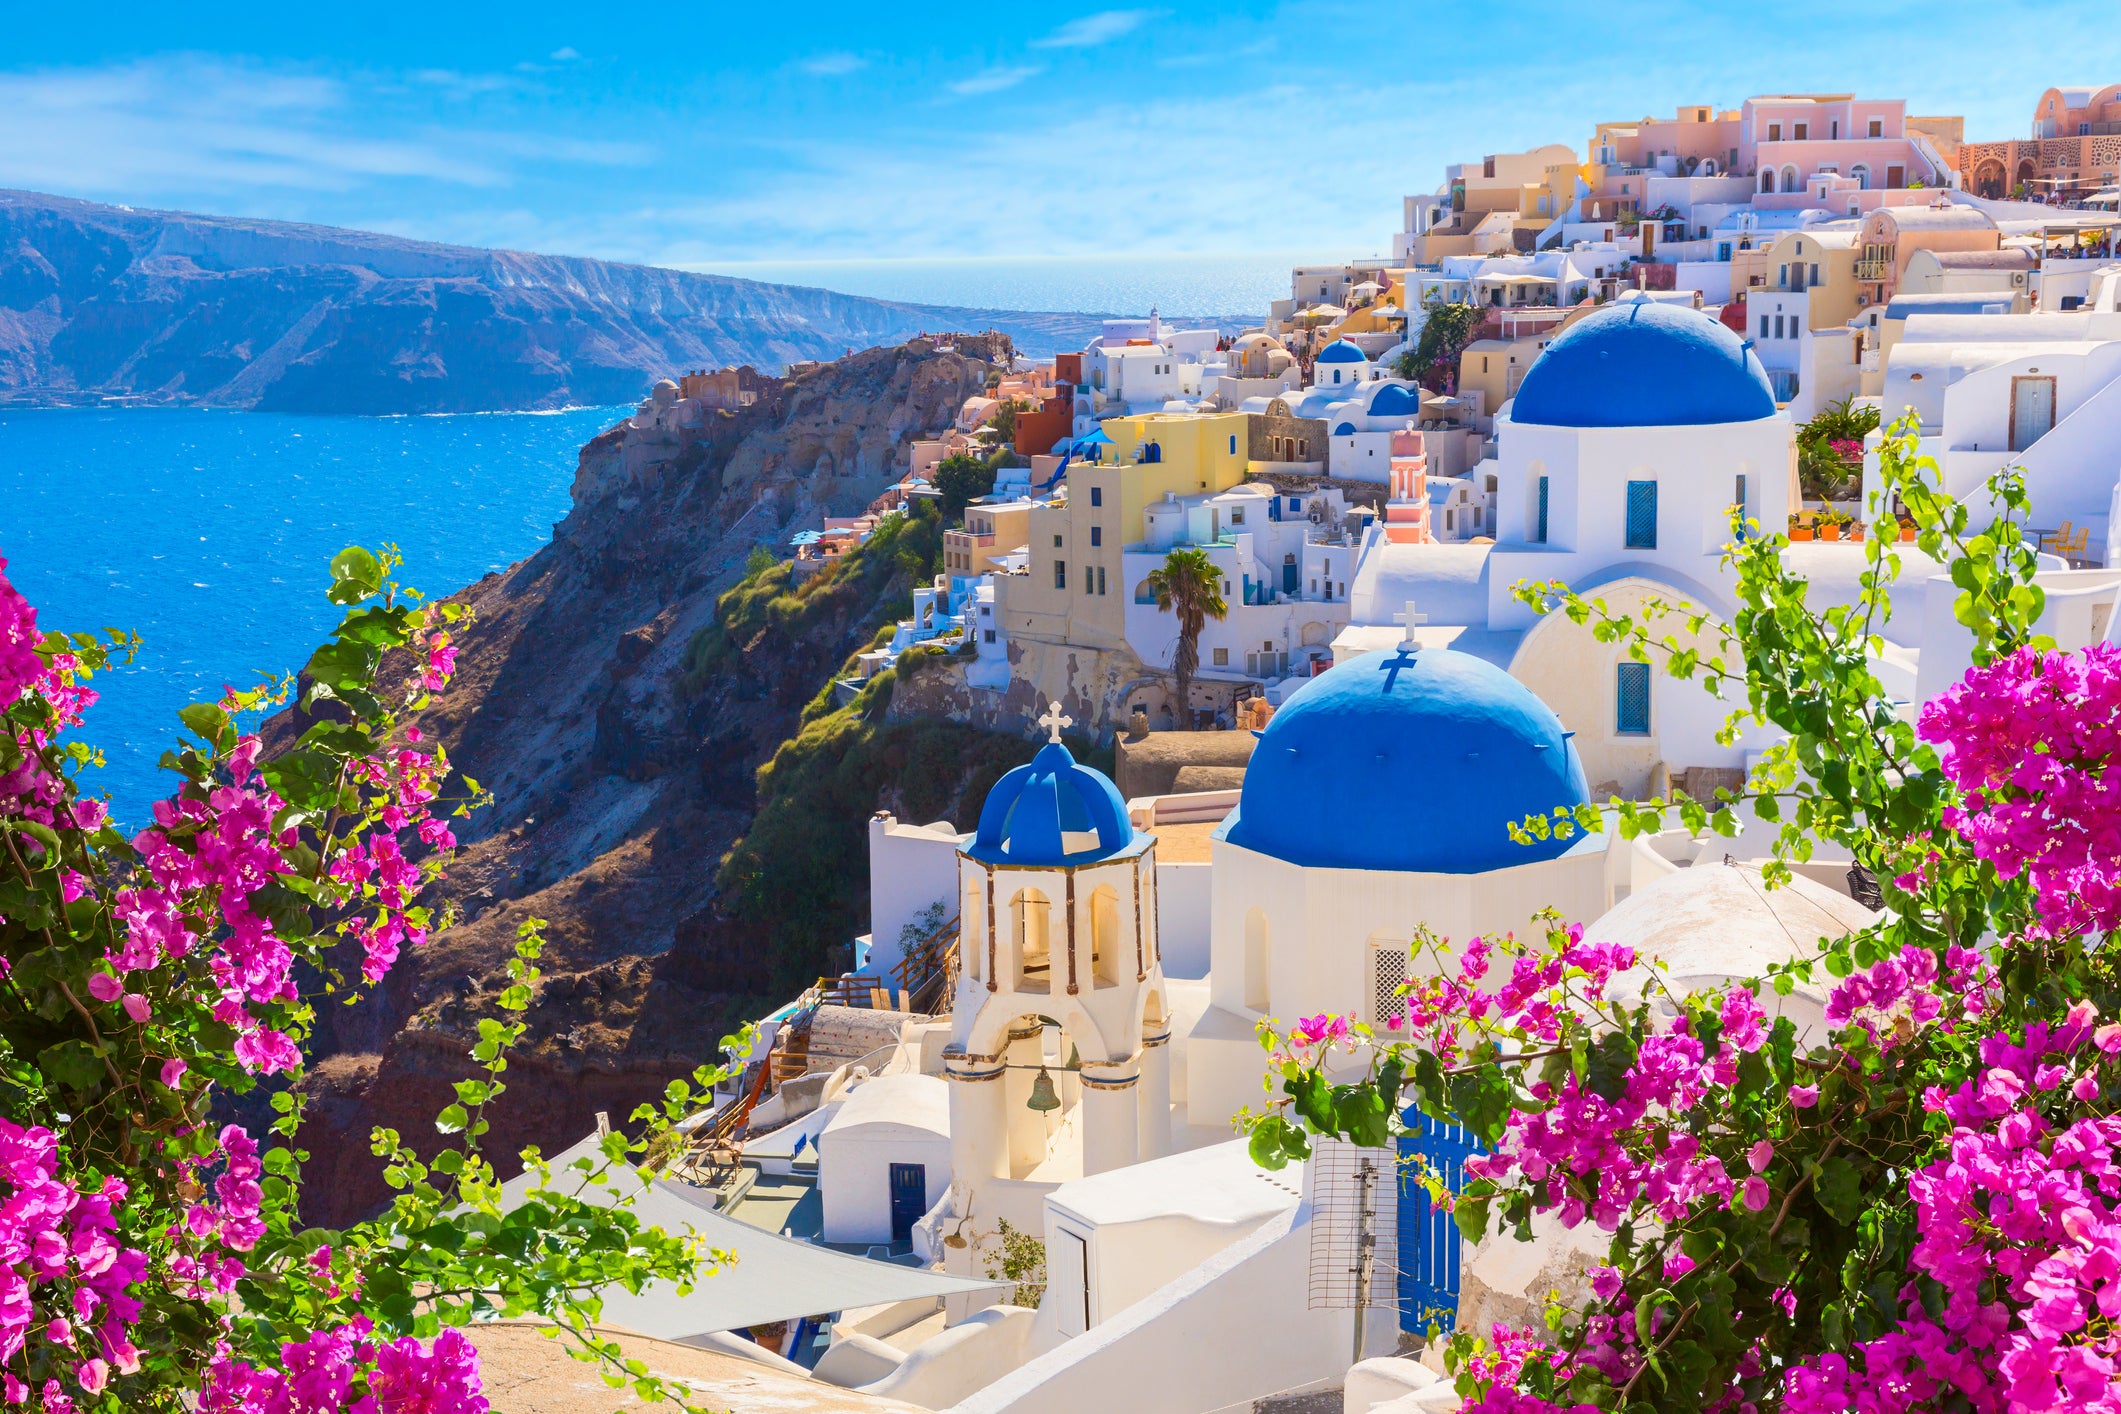 Britain is one of the most important inbound tourism markets for Greece